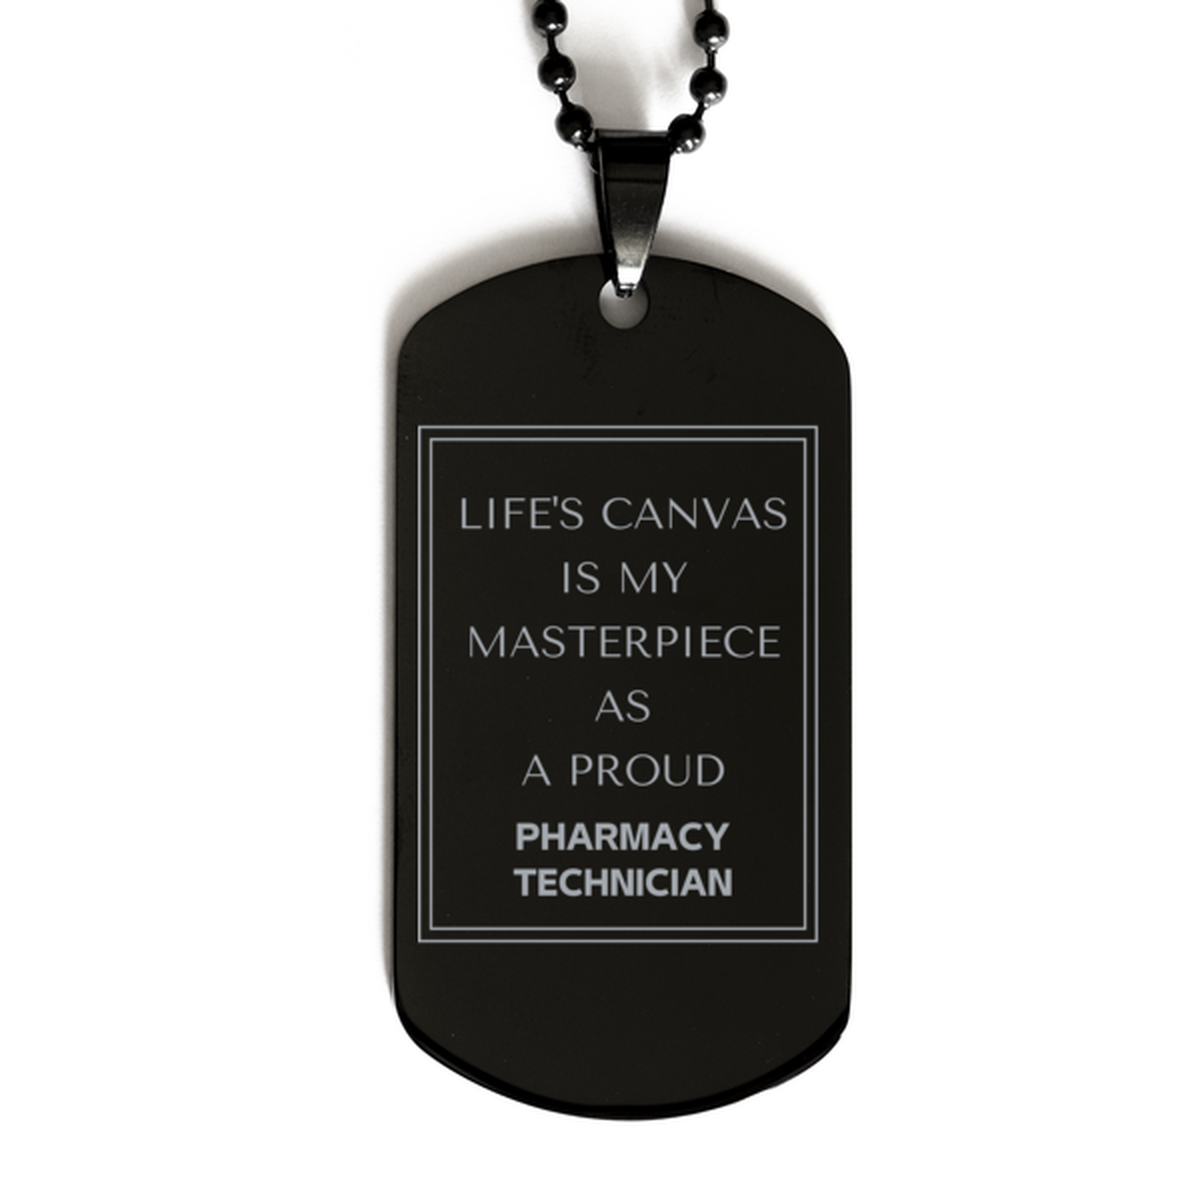 Proud Pharmacy Technician Gifts, Life's canvas is my masterpiece, Epic Birthday Christmas Unique Black Dog Tag For Pharmacy Technician, Coworkers, Men, Women, Friends